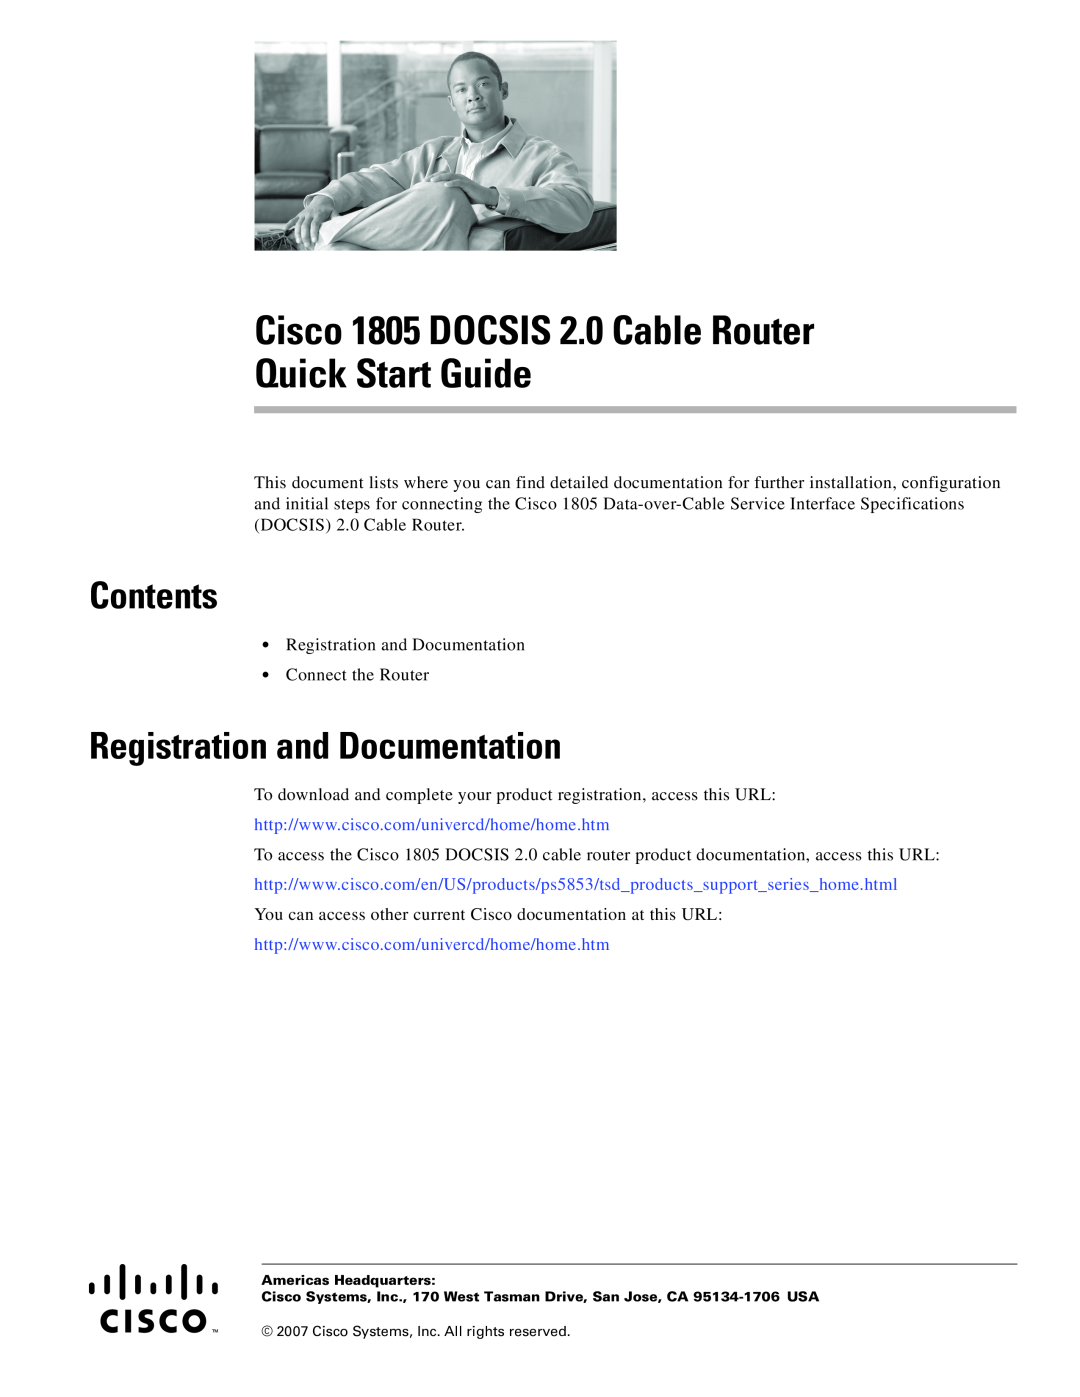 Cisco Systems CISCO1805 quick start Contents, Registration and Documentation 